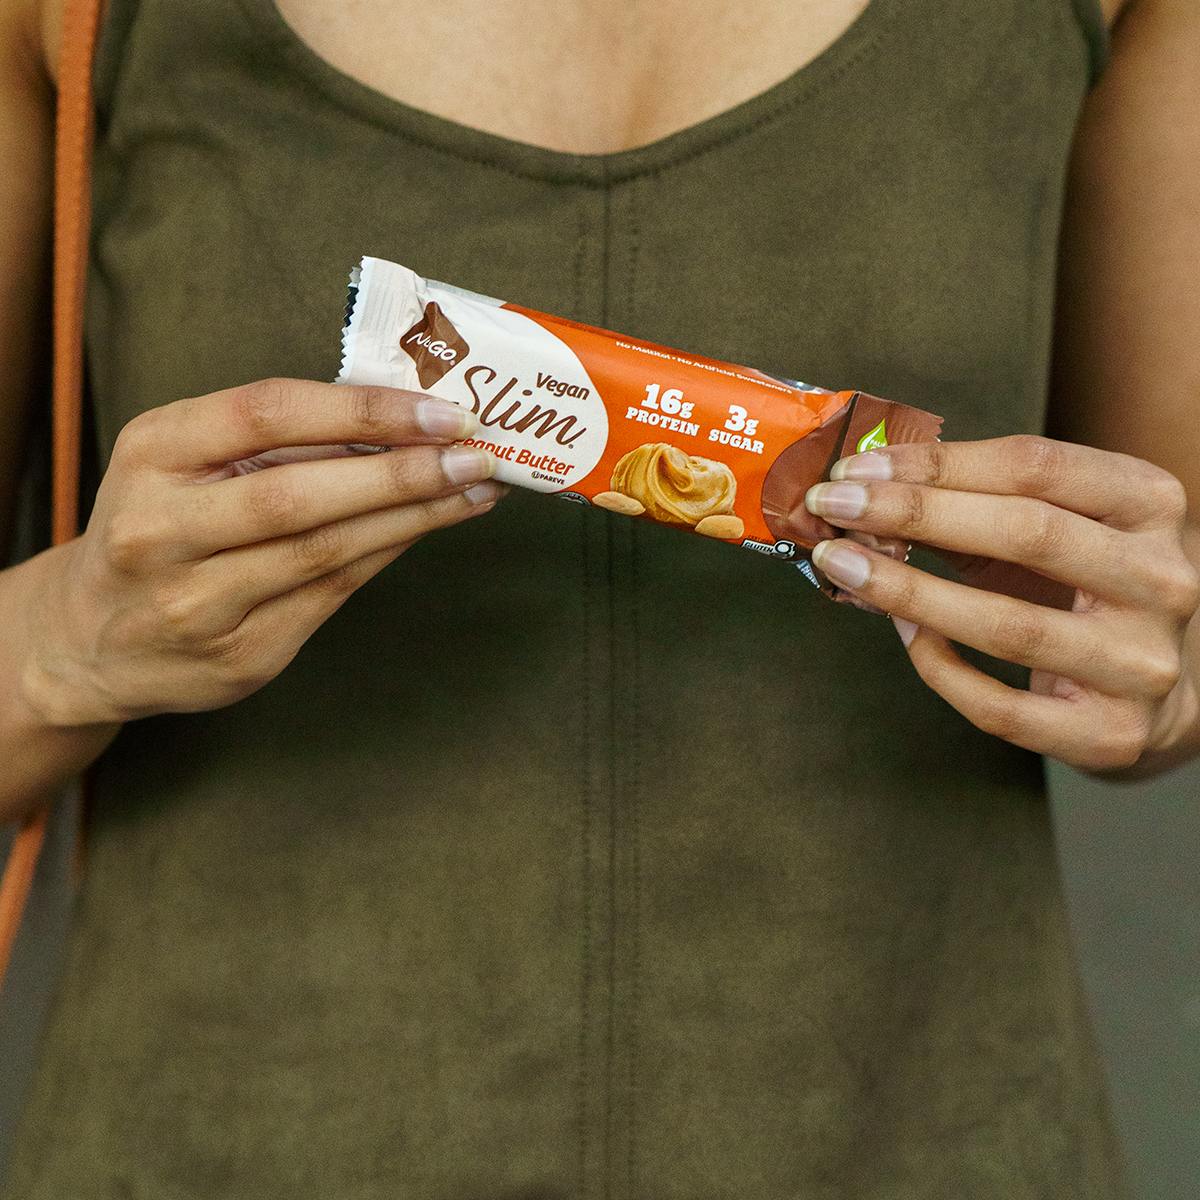 NuGo Slim Crunchy Peanut Butter Bar in front of Woman's body